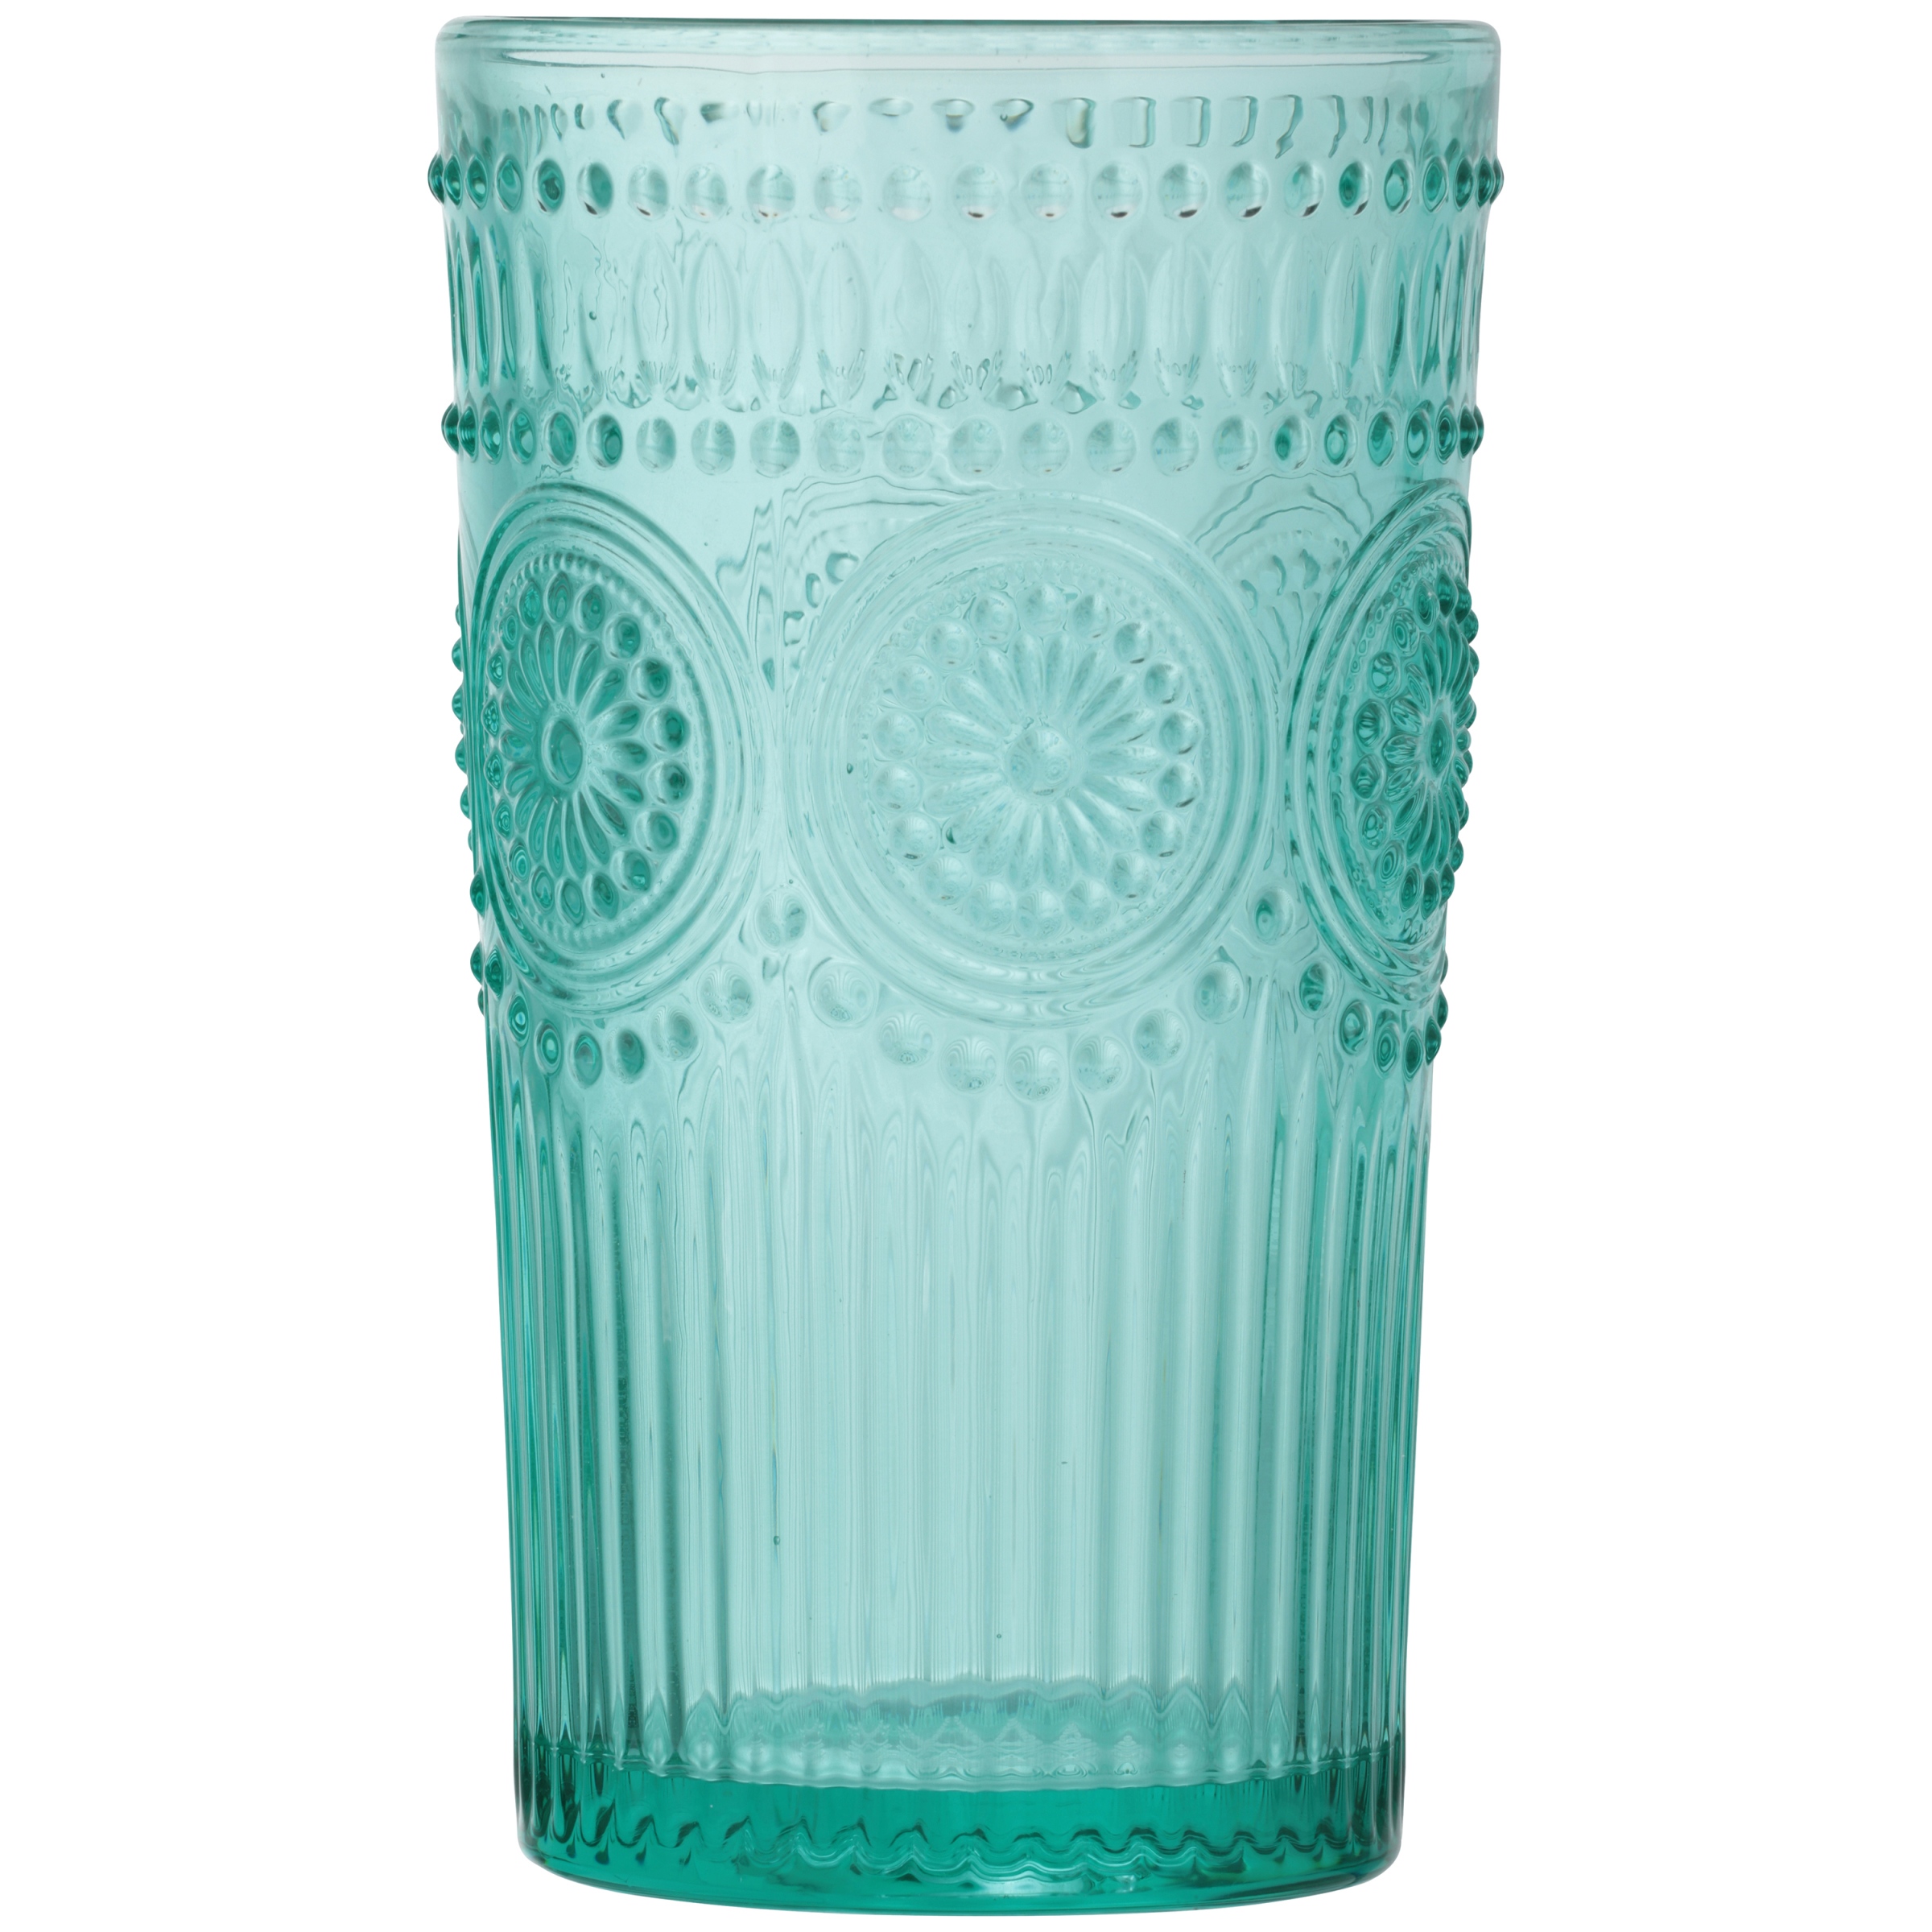 The Pioneer Woman Adeline 16-Ounce Teal Emboss Glass Tumblers, Set of 4 - image 5 of 5